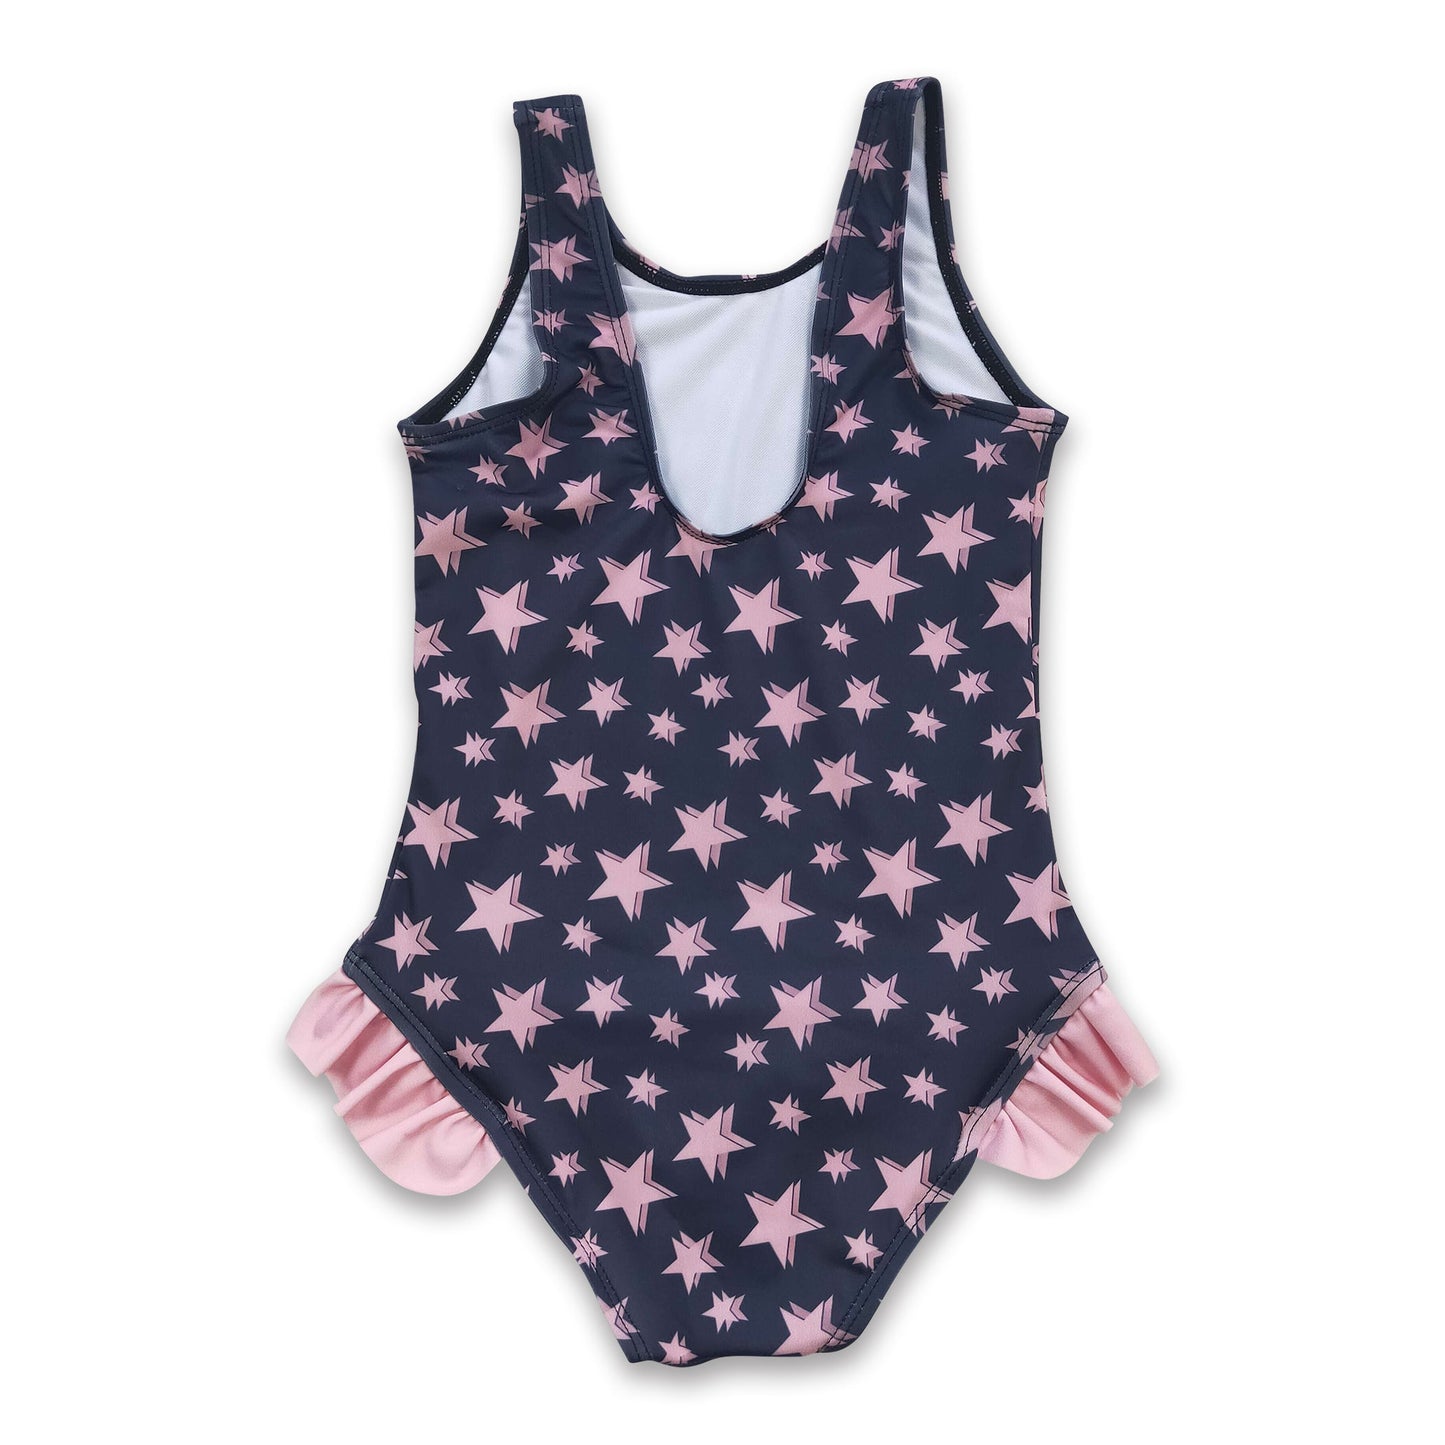 Star print baby girls summer one pc lining swimsuit